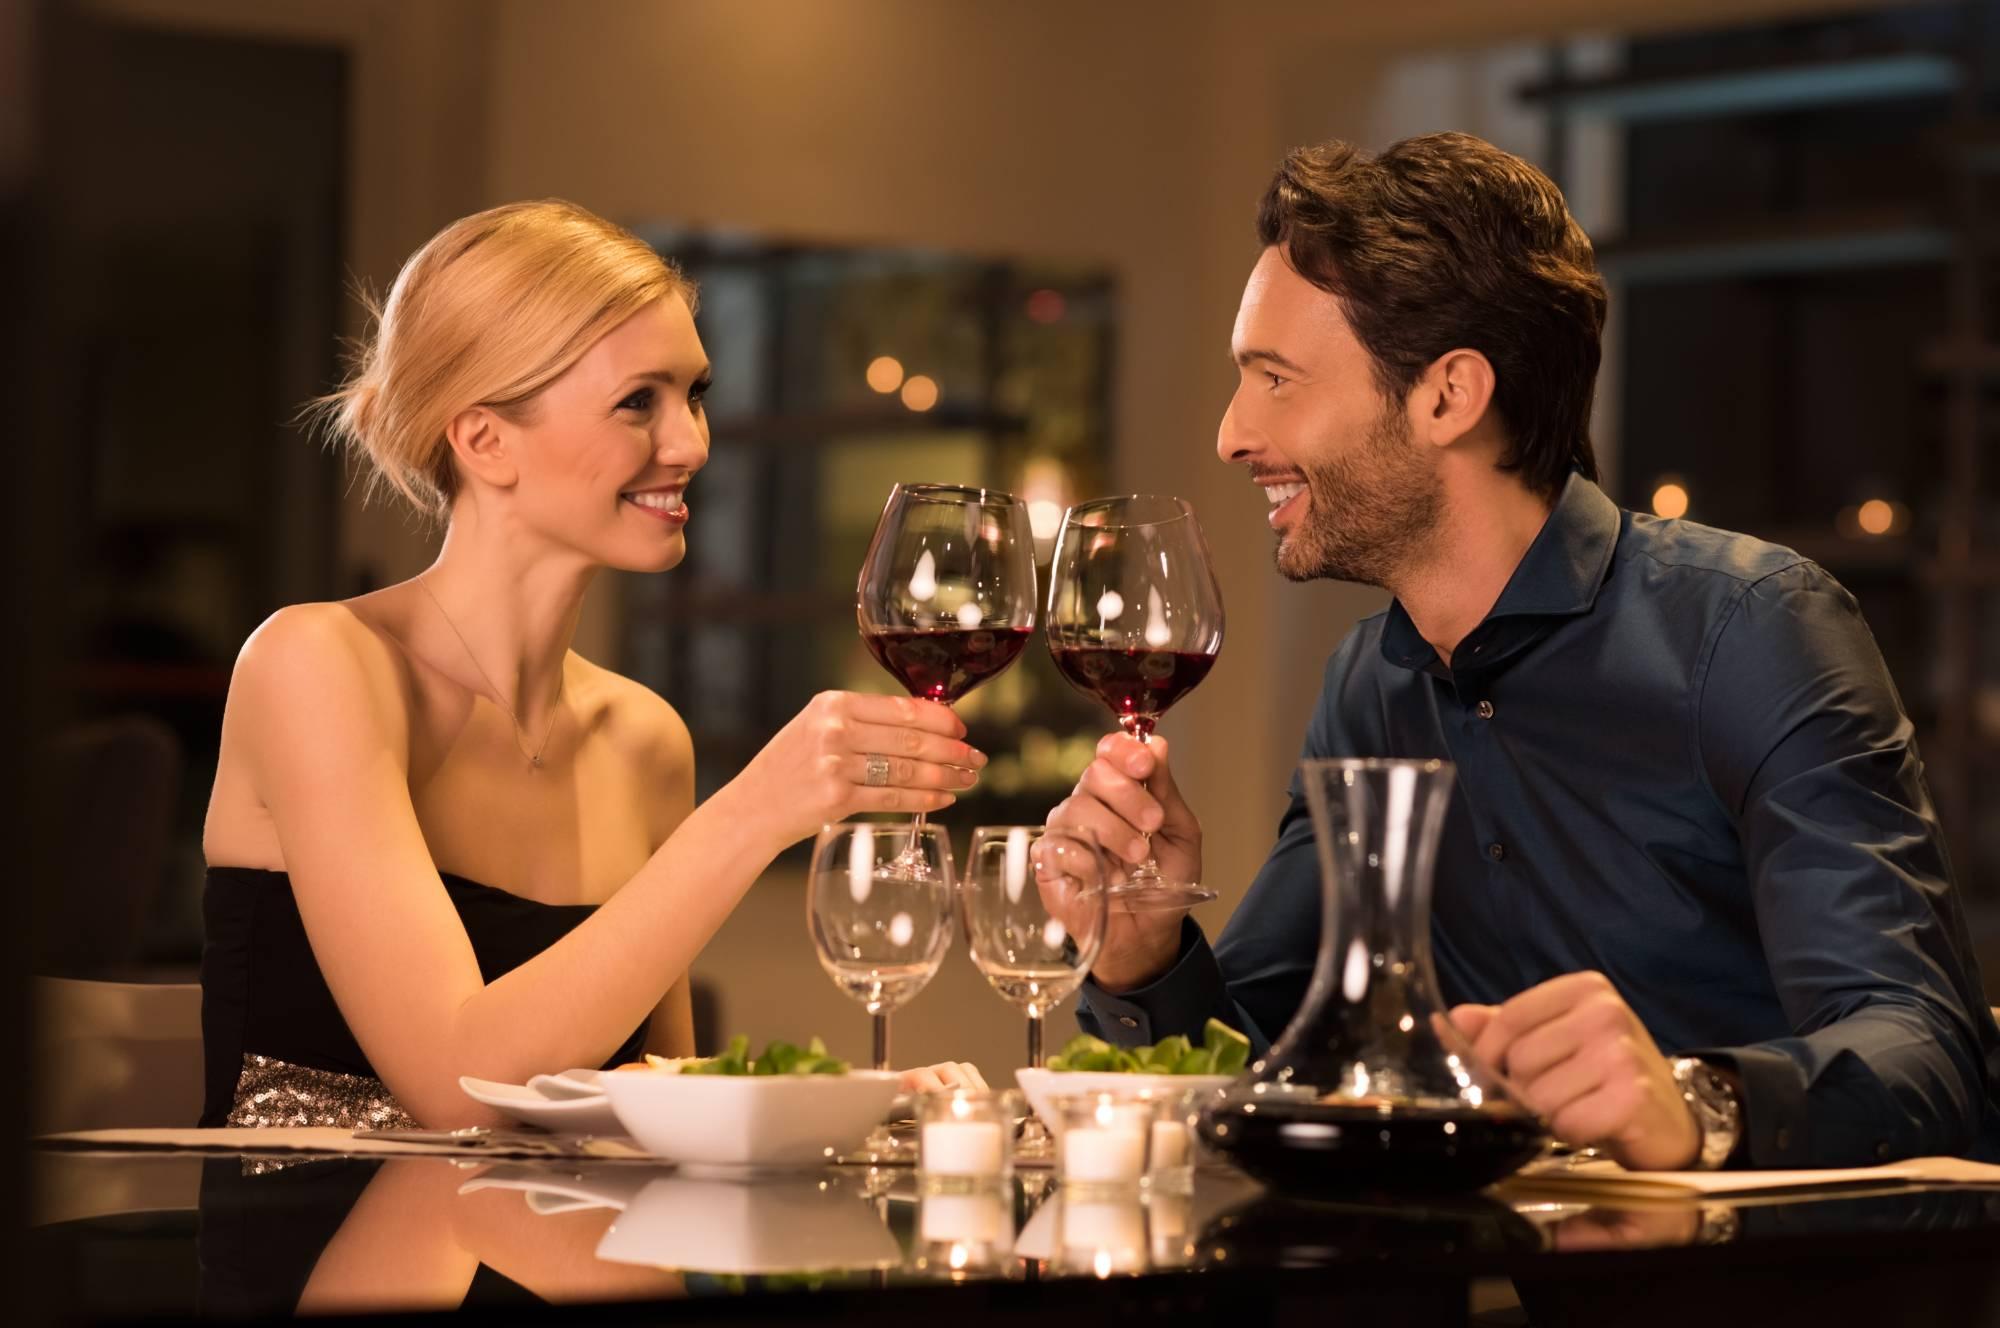 young couple at the restaurant having some dinner and wine